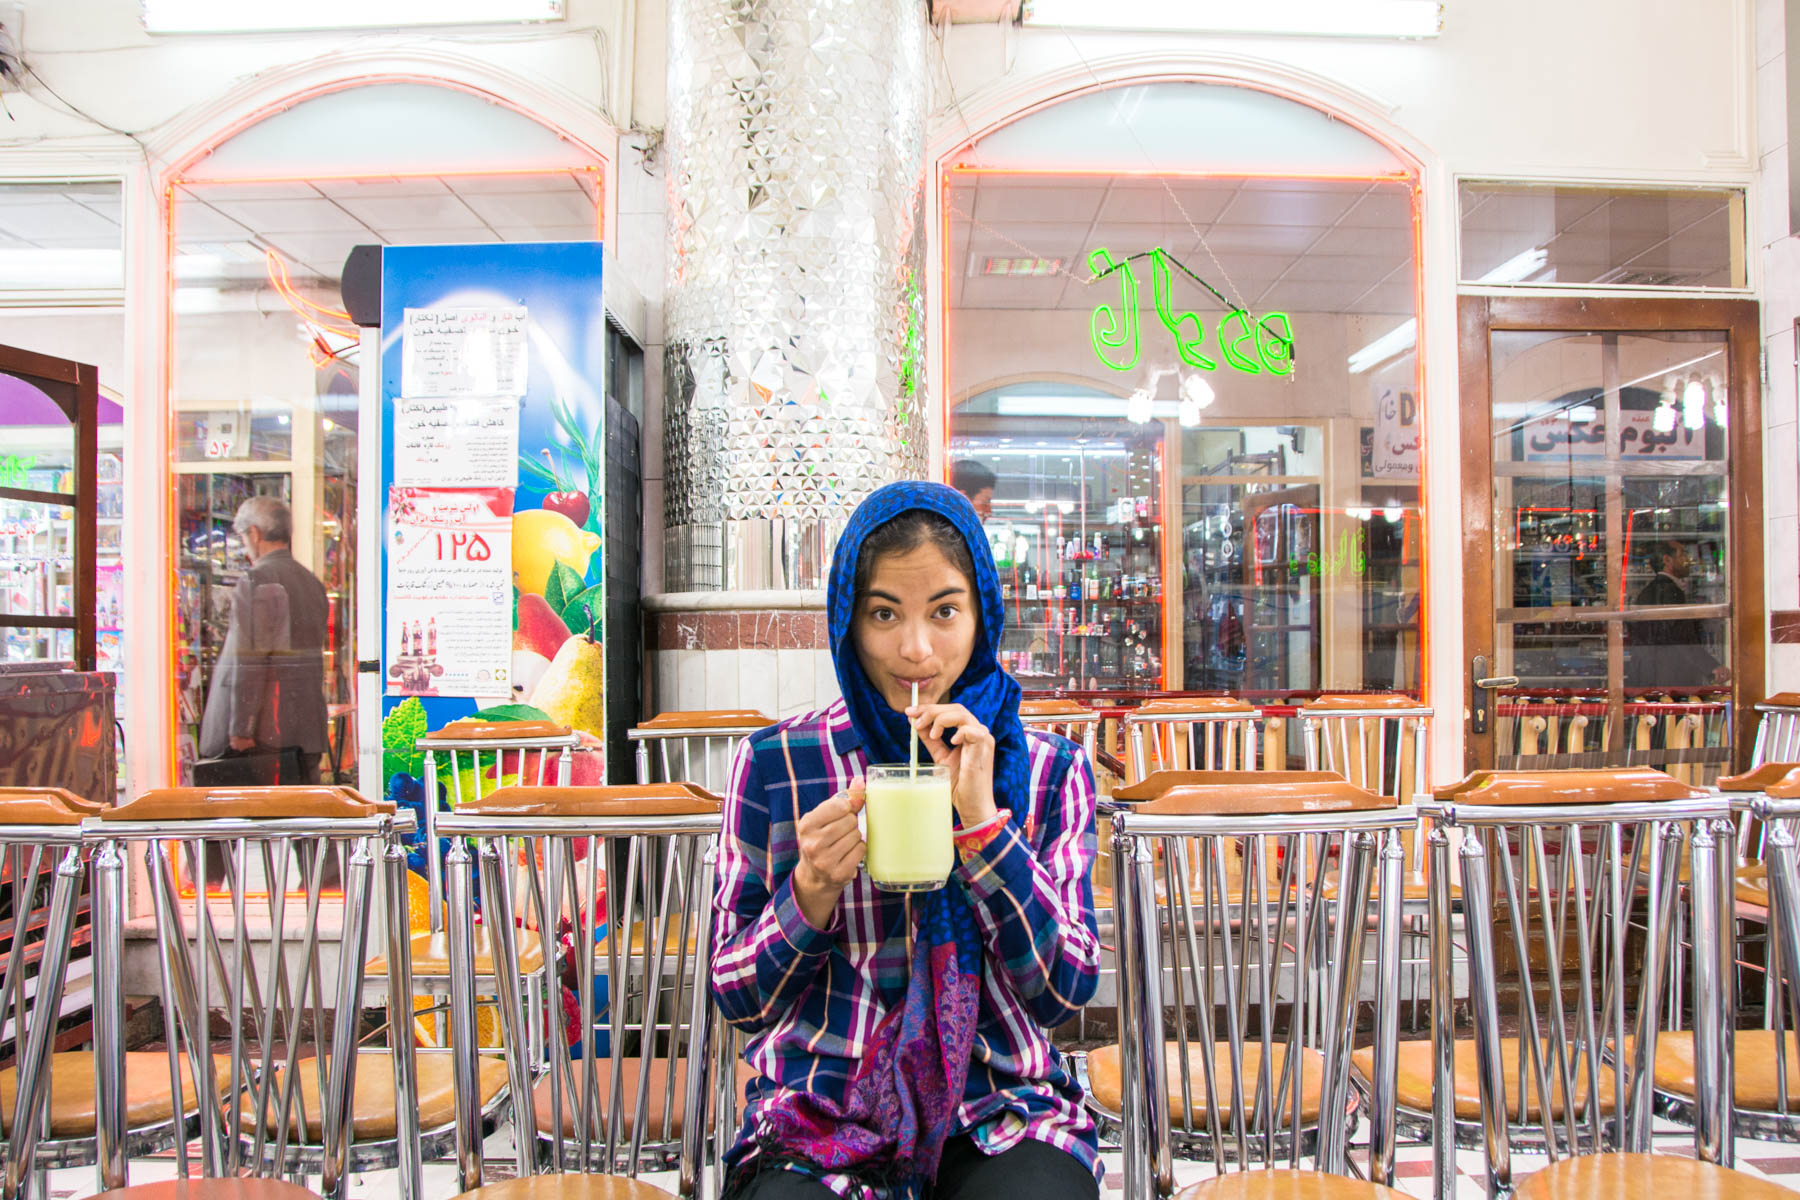 Sipping melon smoothies in Tabriz, Iran.